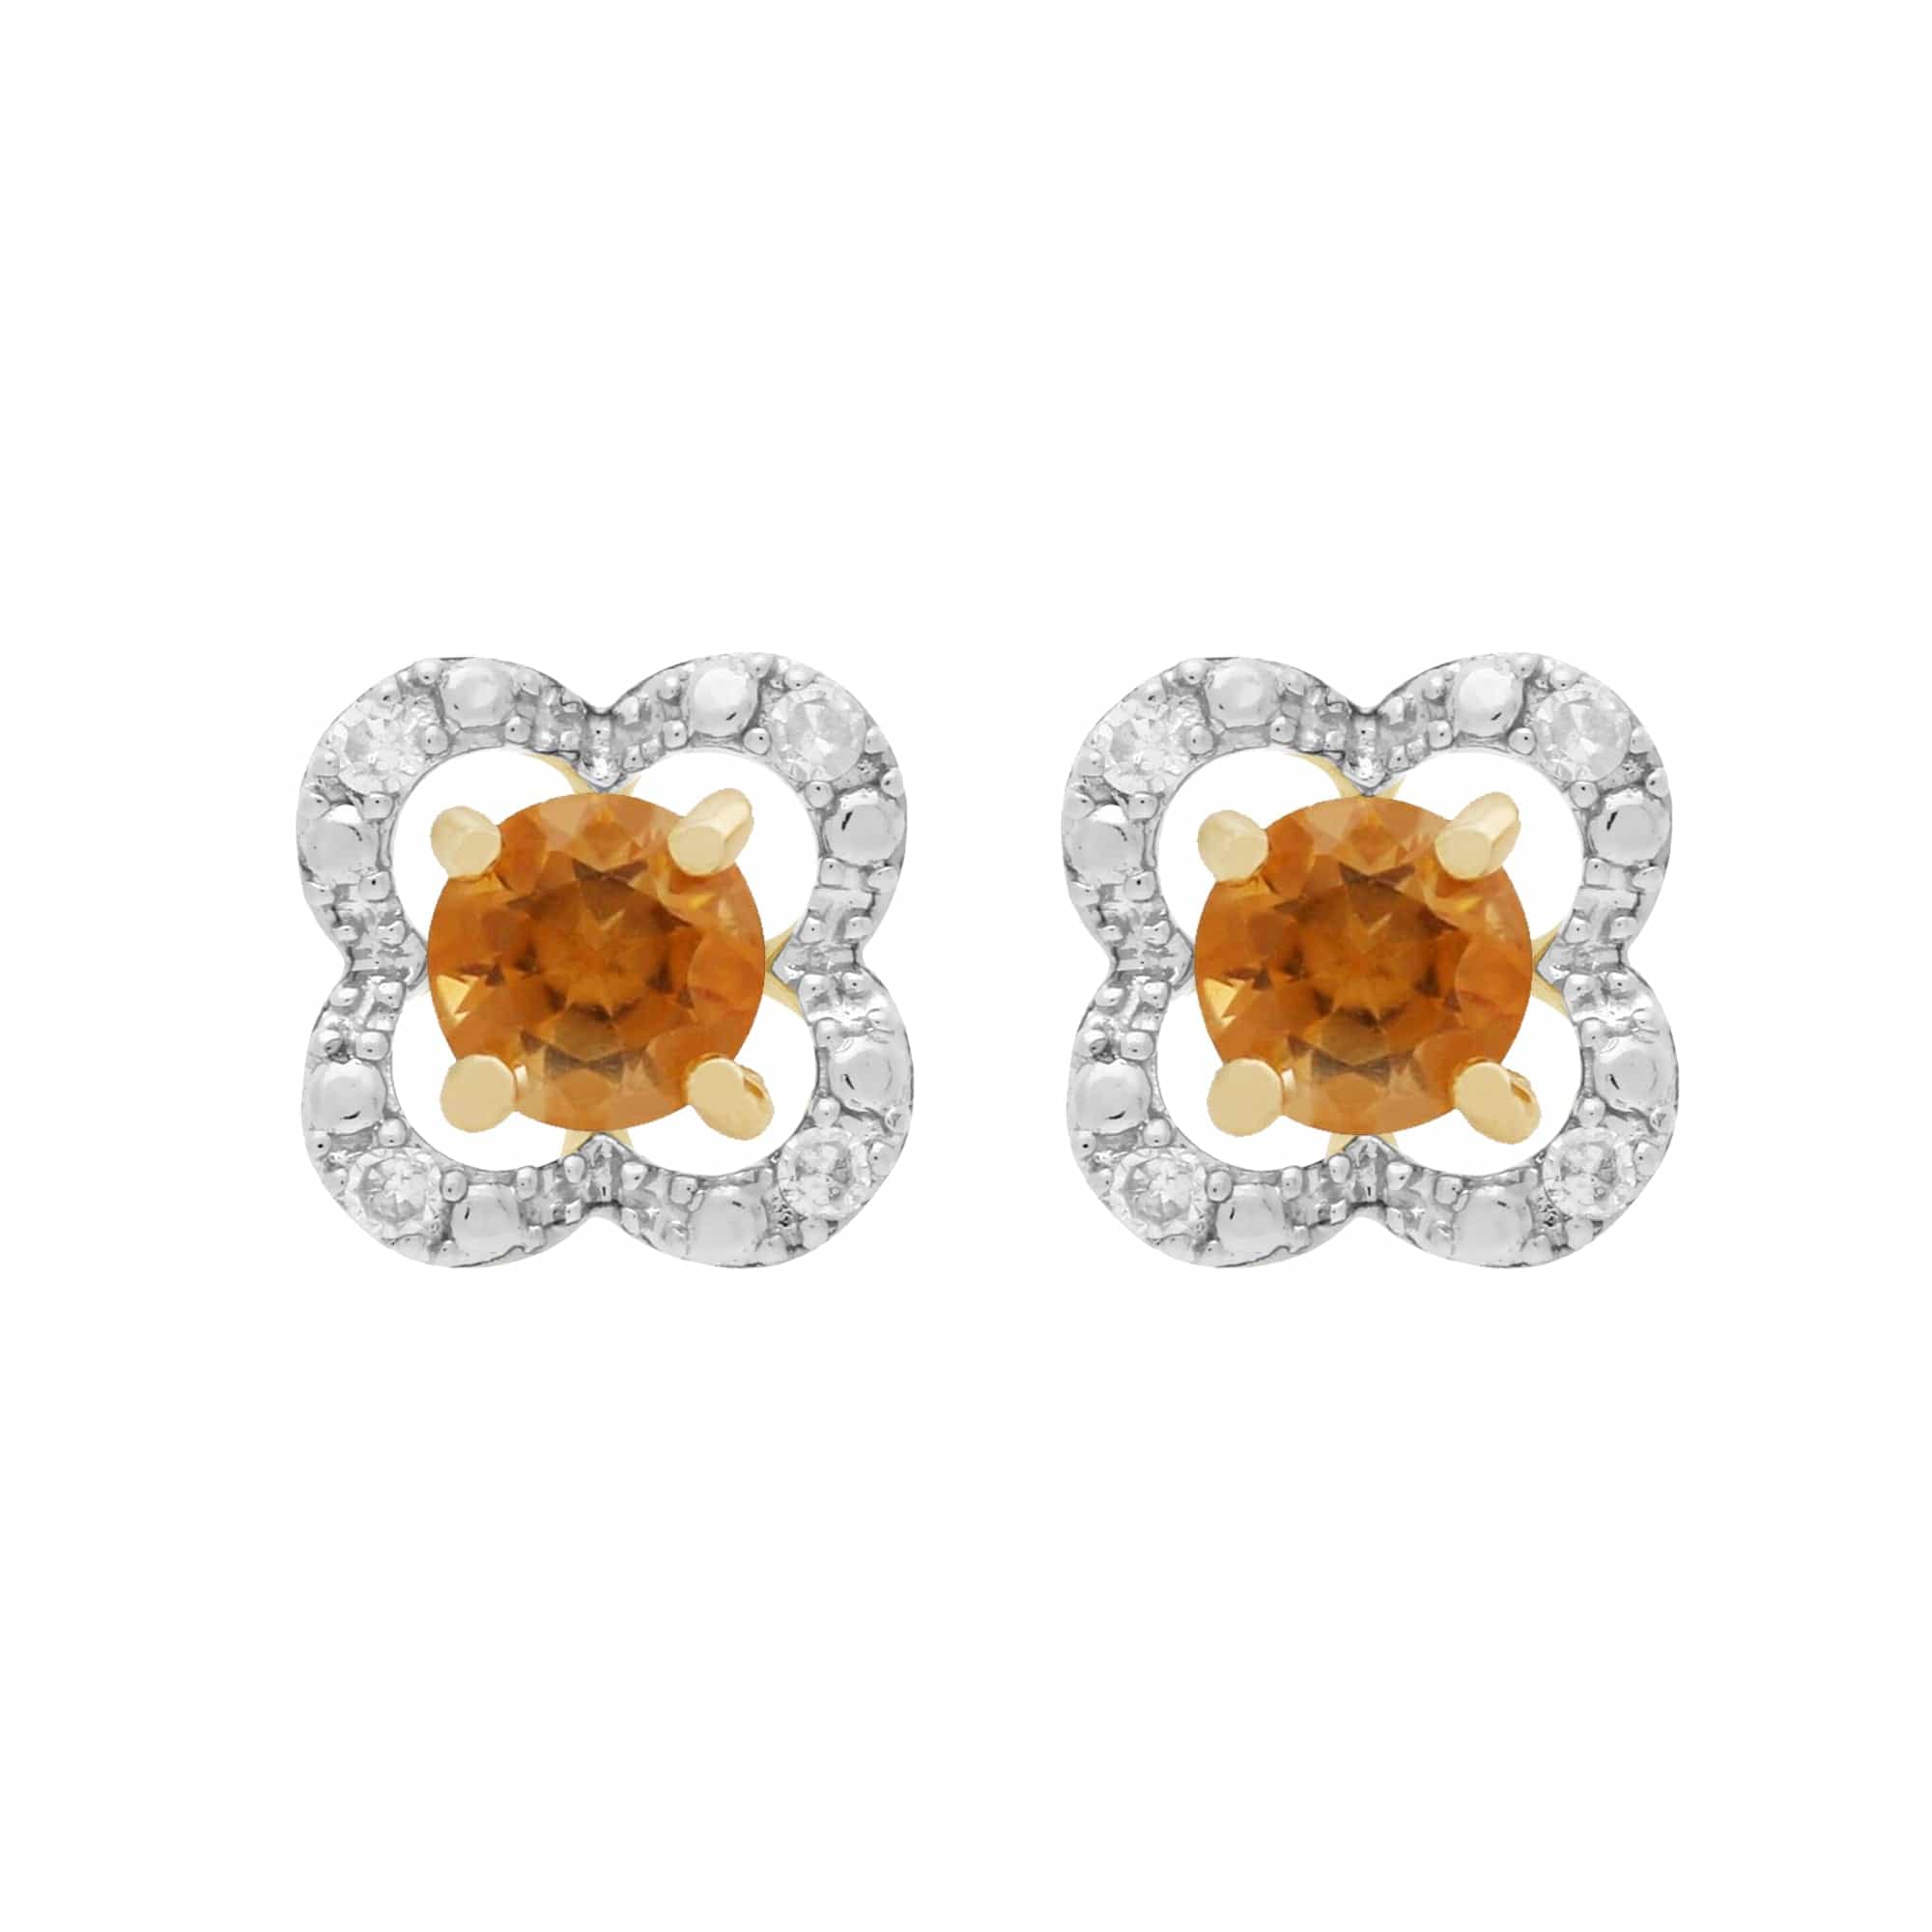 183E0083139-191E0375019 Classic Round Citrine Stud Earrings with Detachable Diamond Floral Ear Jacket in 9ct Yellow Gold 1